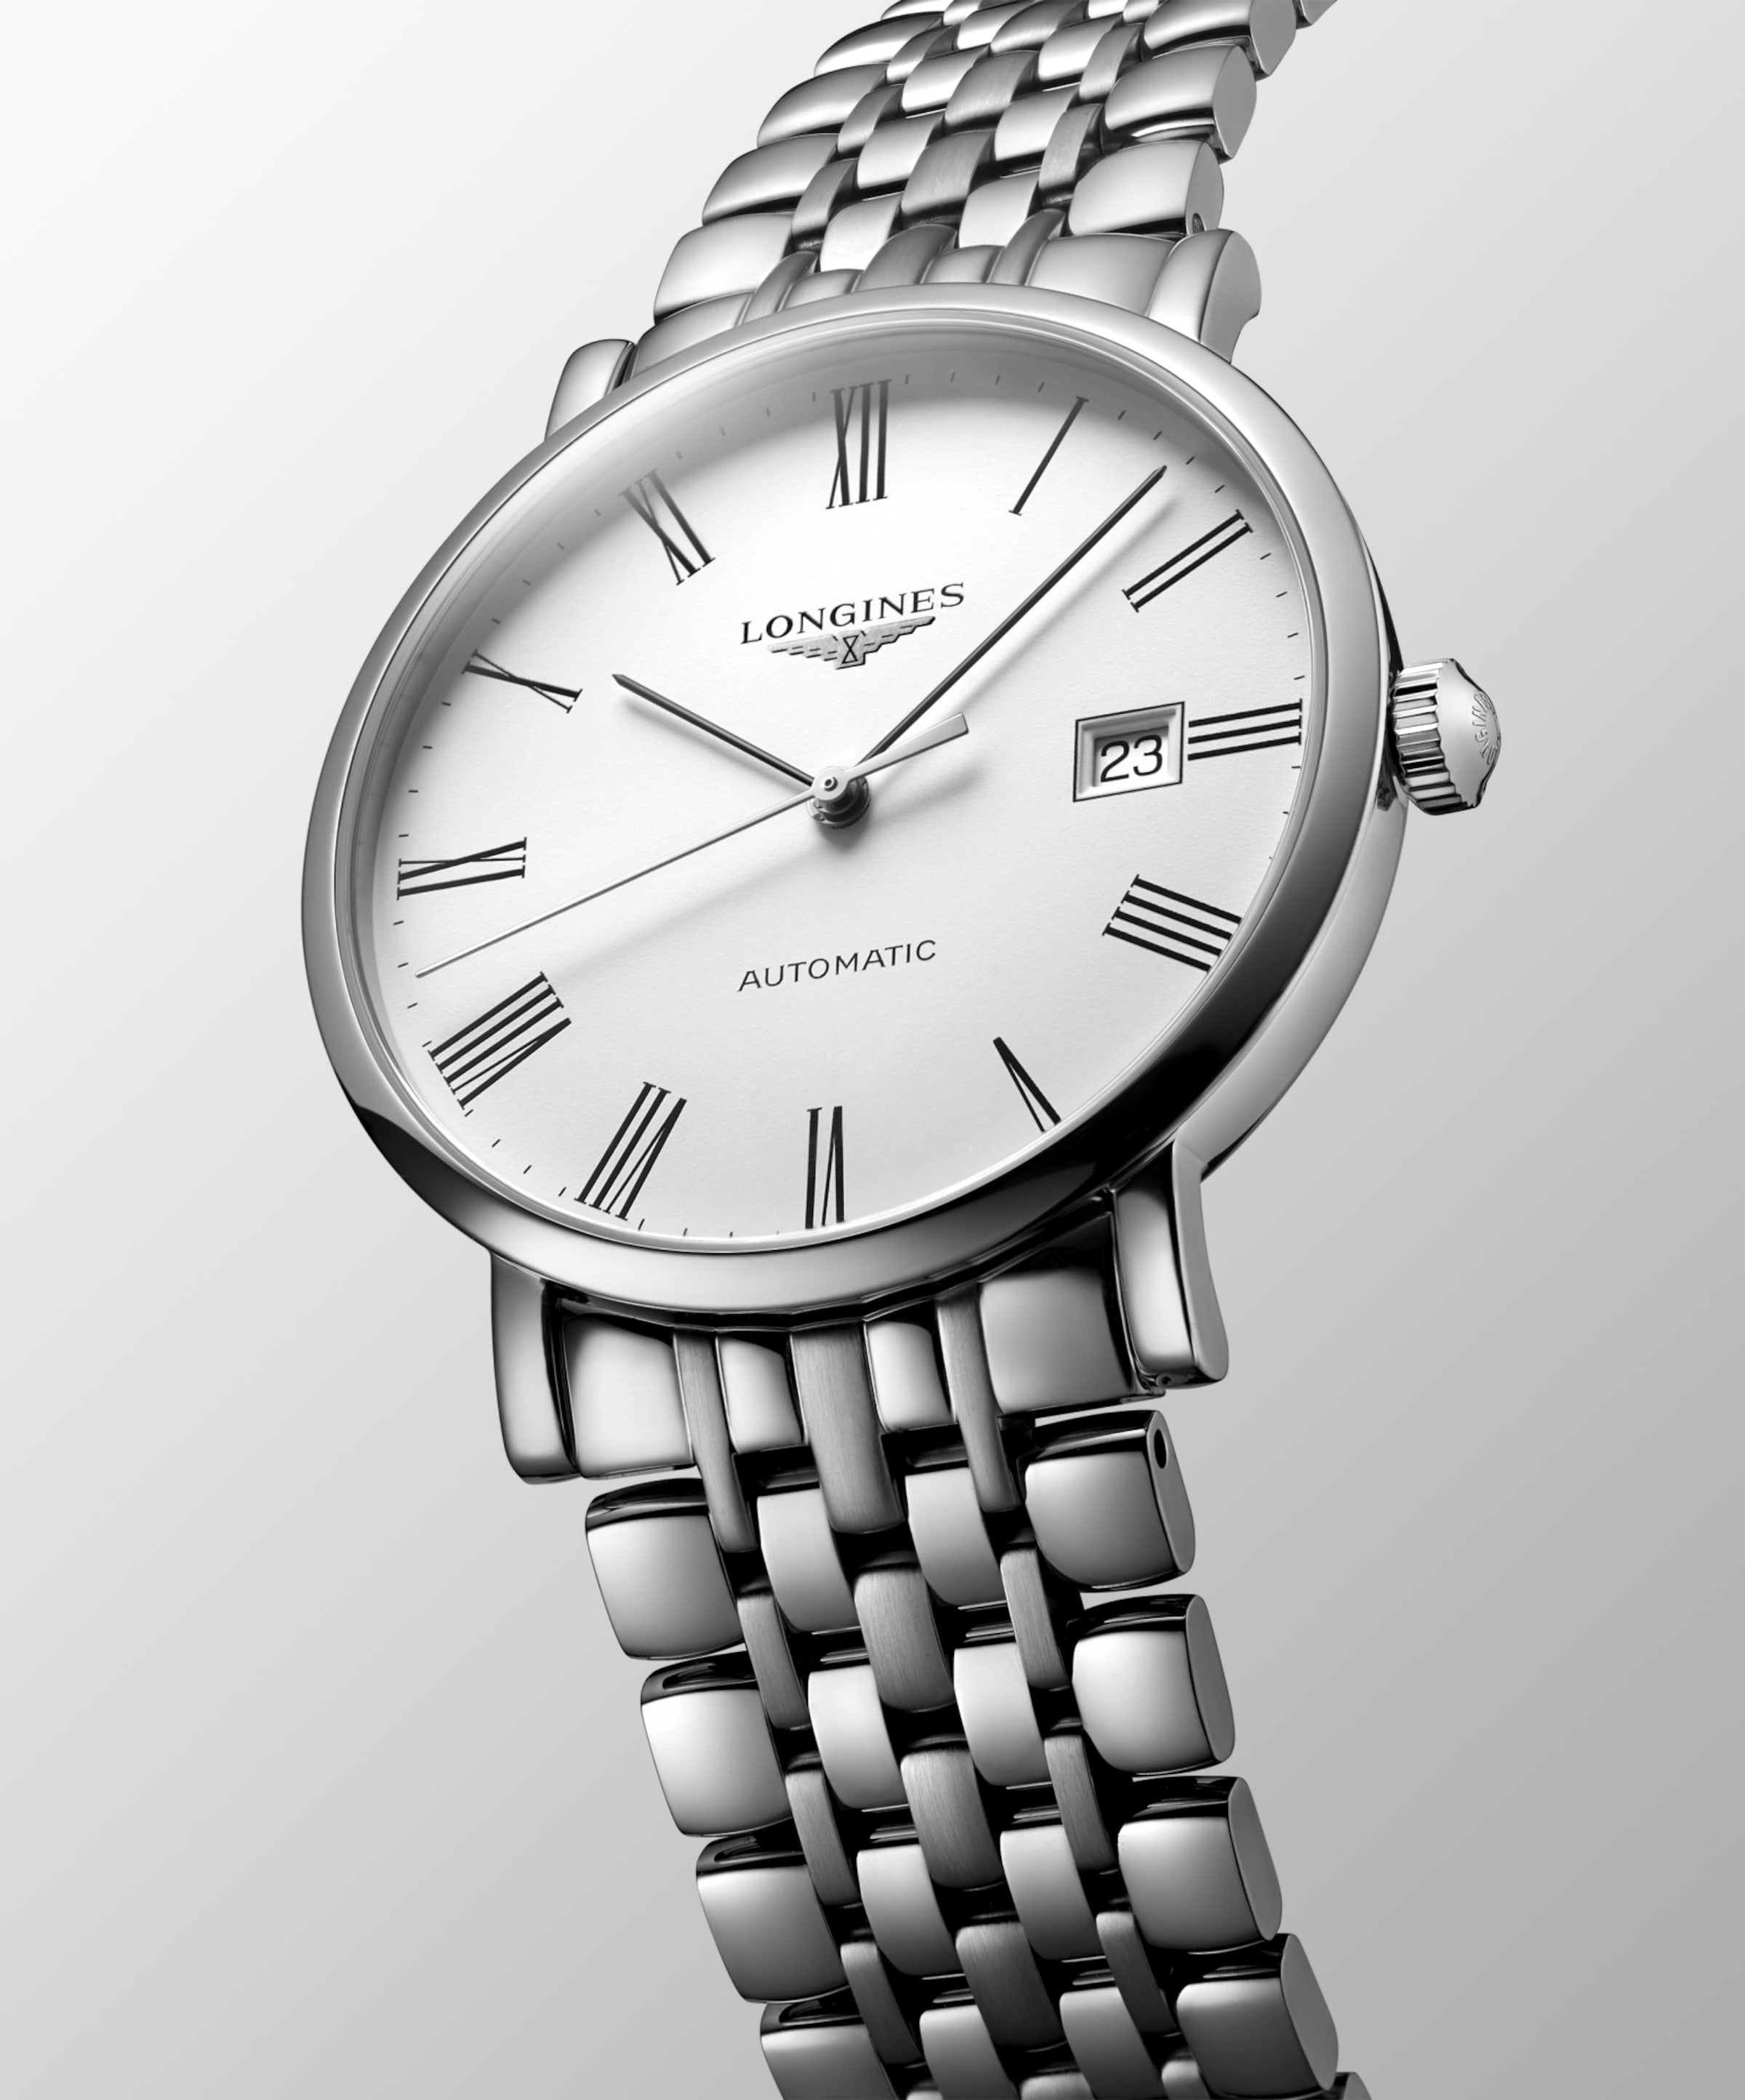 Longines ELEGANT COLLECTION Automatic Stainless steel Watch - L4.910.4.11.6